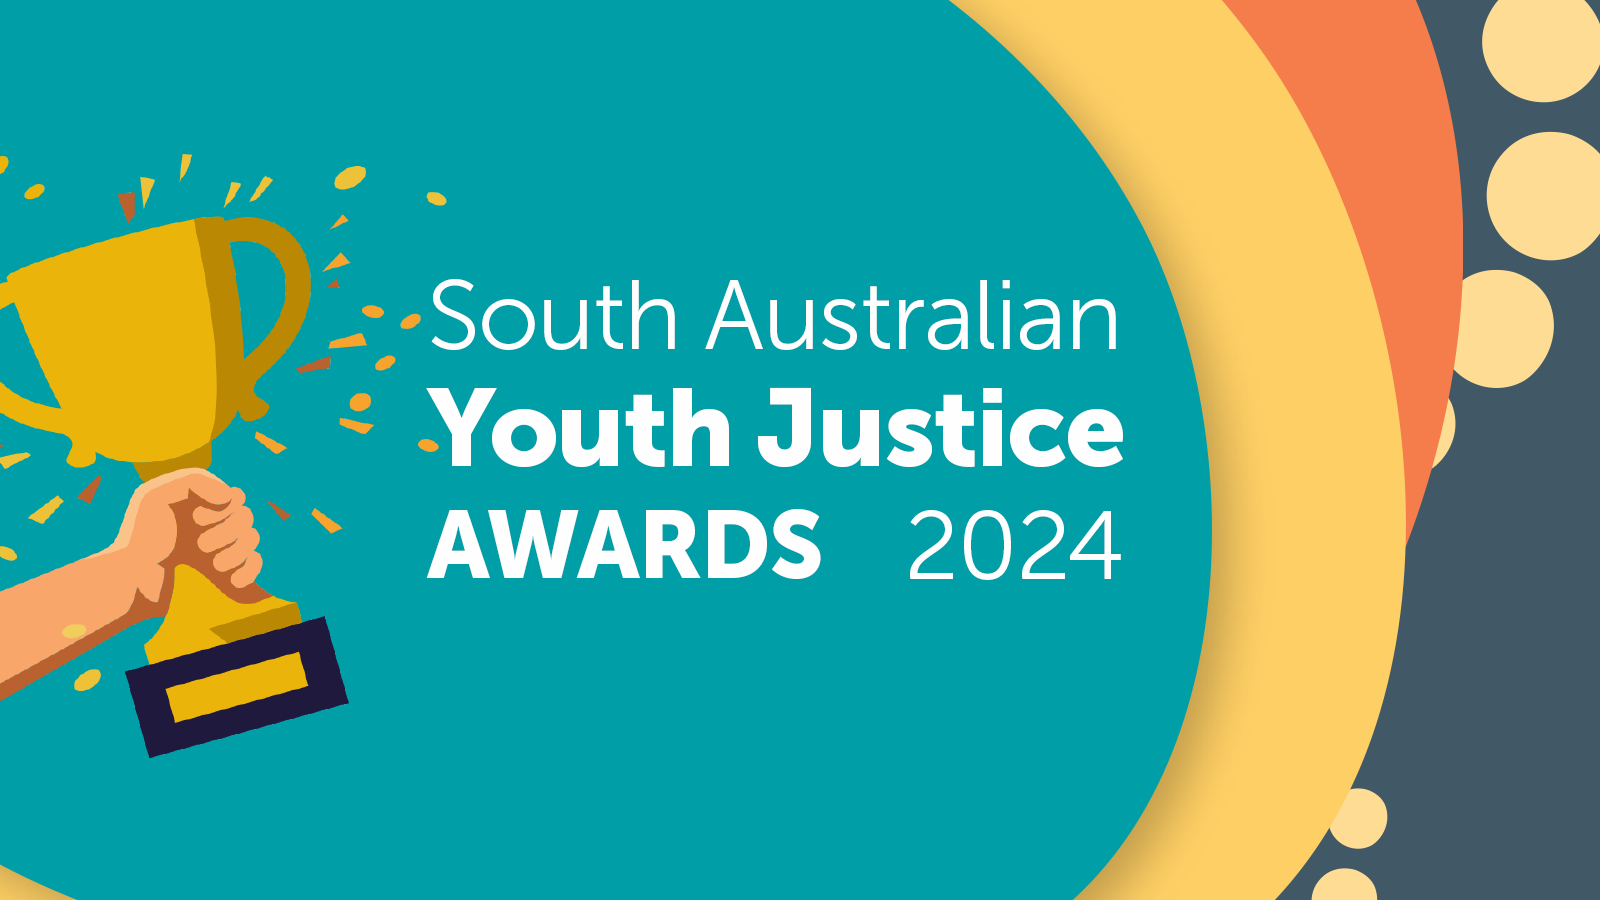 South Australian Youth Justice Awards 2024